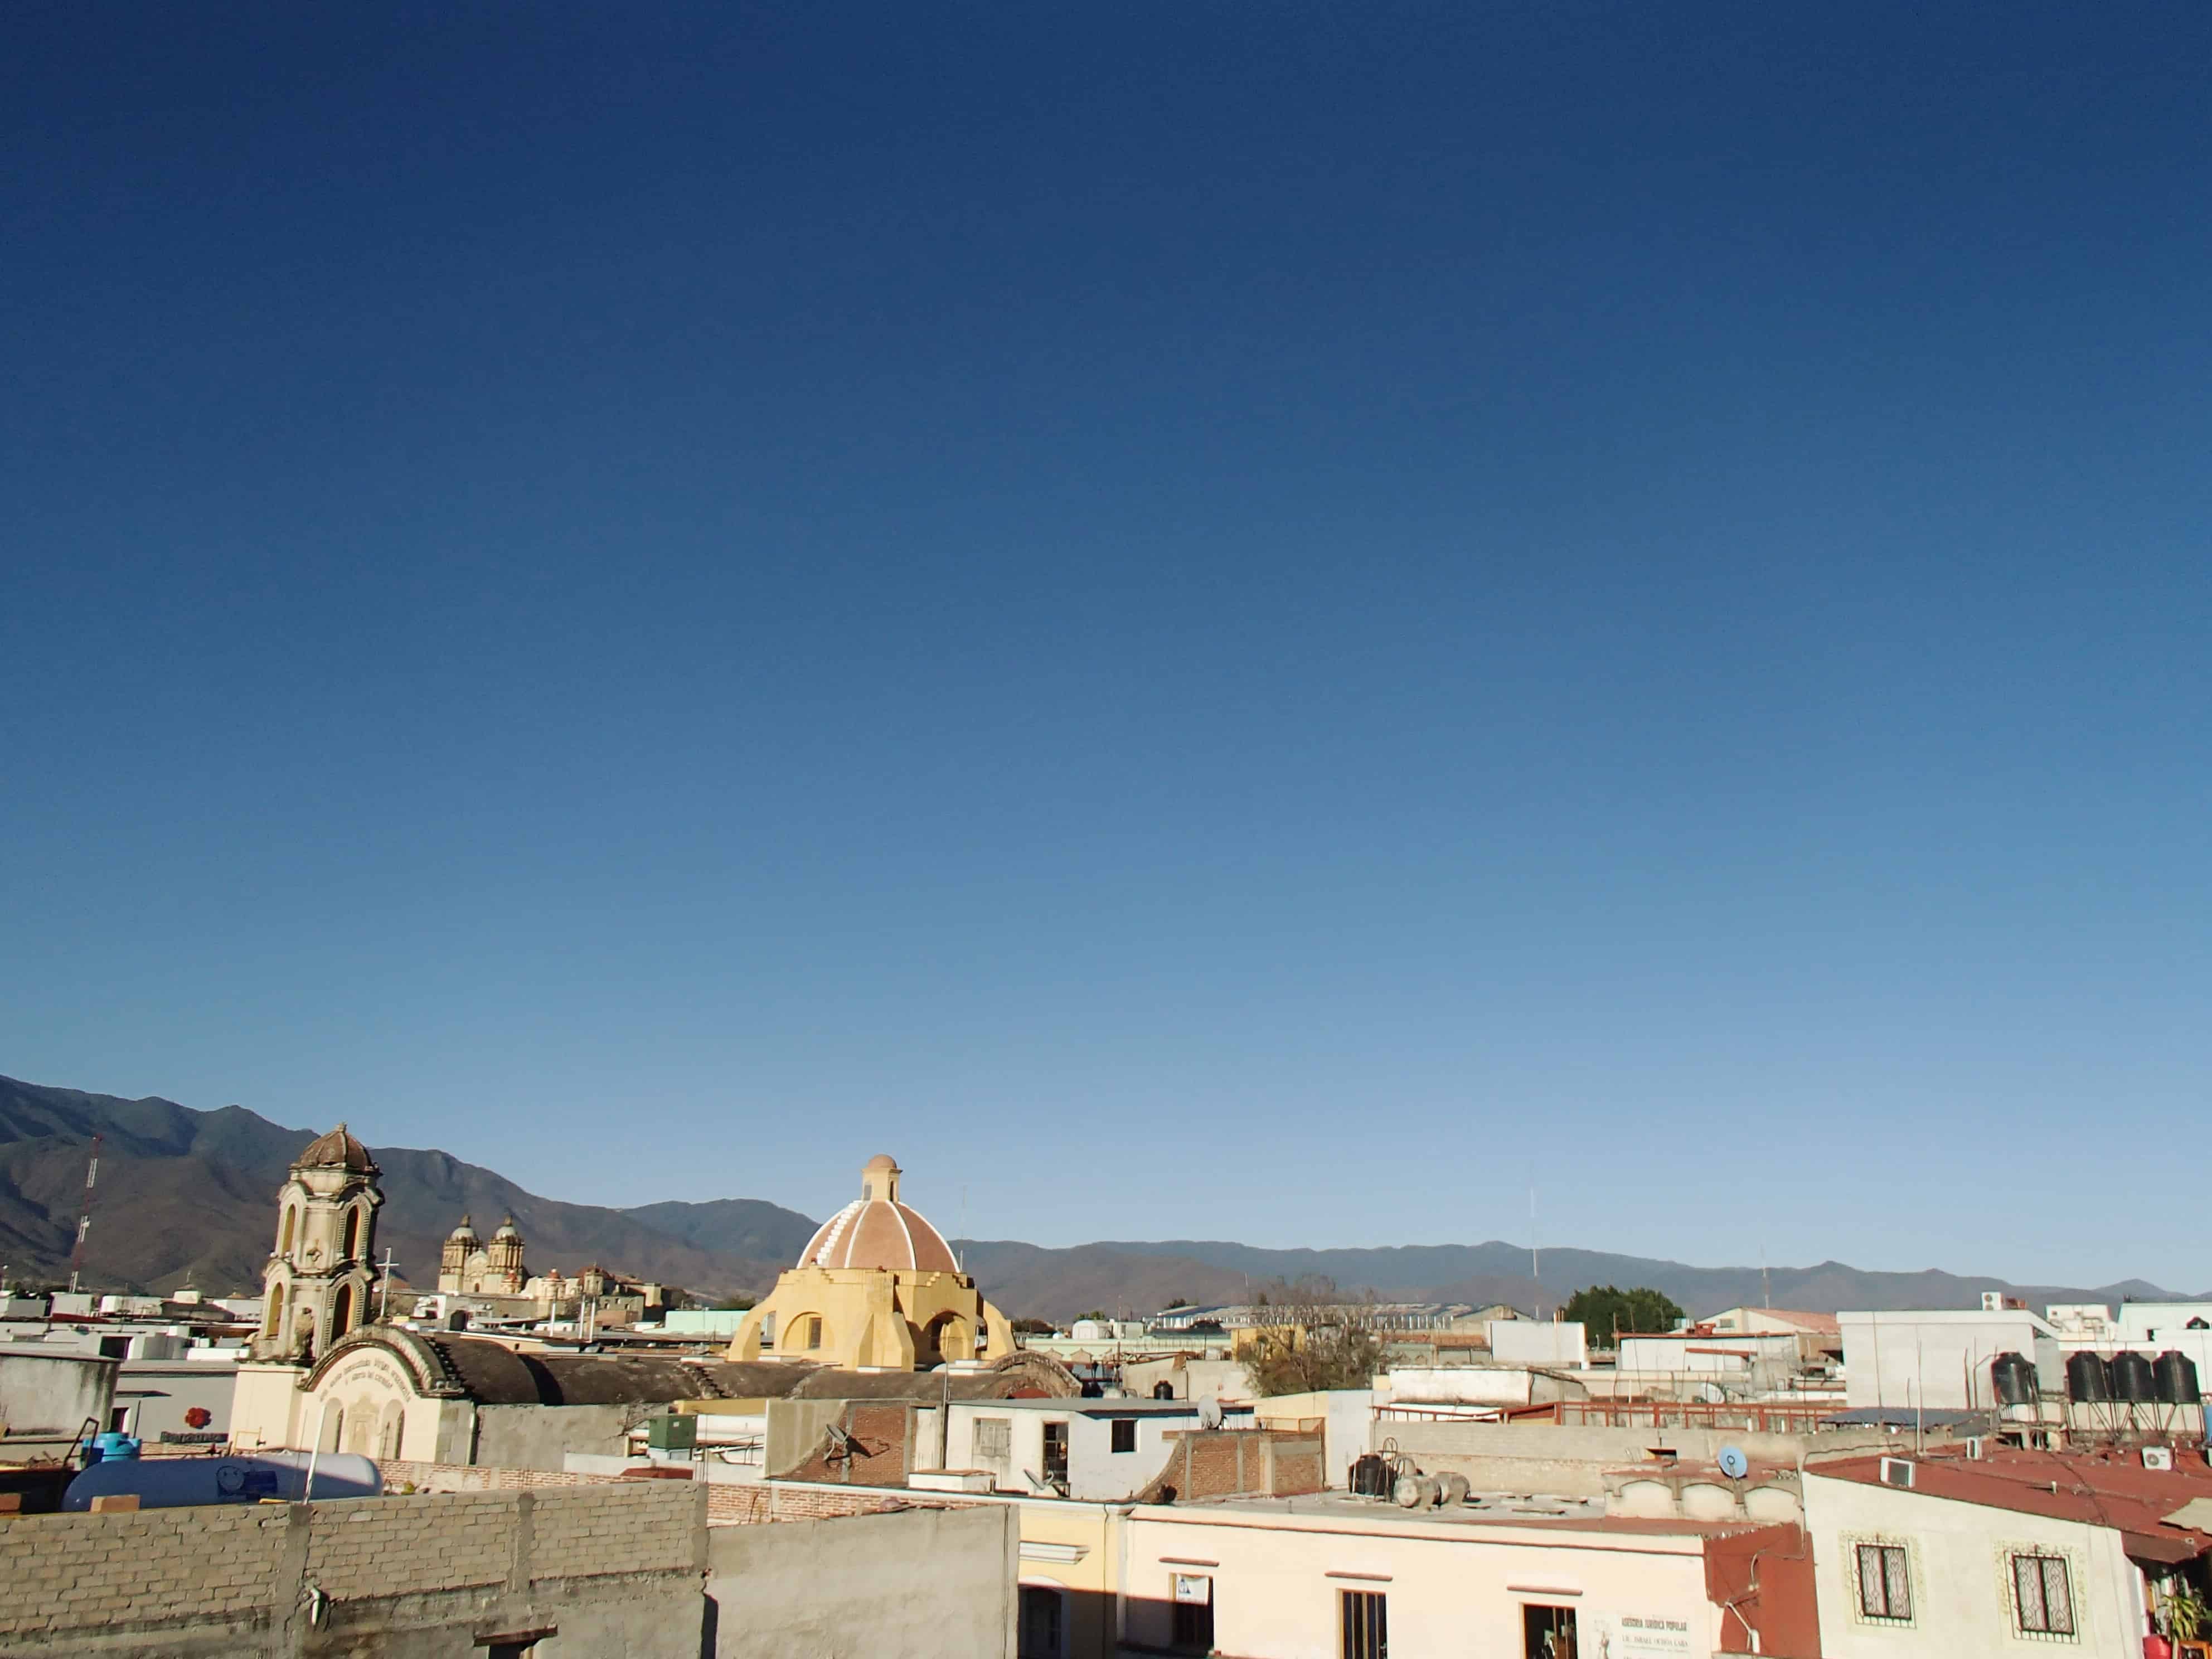 A city view of Oaxaca City, Mexico from our hotel: Parador San Miguel. A charming hotel with an open courtyard, exotic birds, and an amazing restaurant! Only 2 blocks away from the city's central markets and cathedrals. | via Autumn All Along